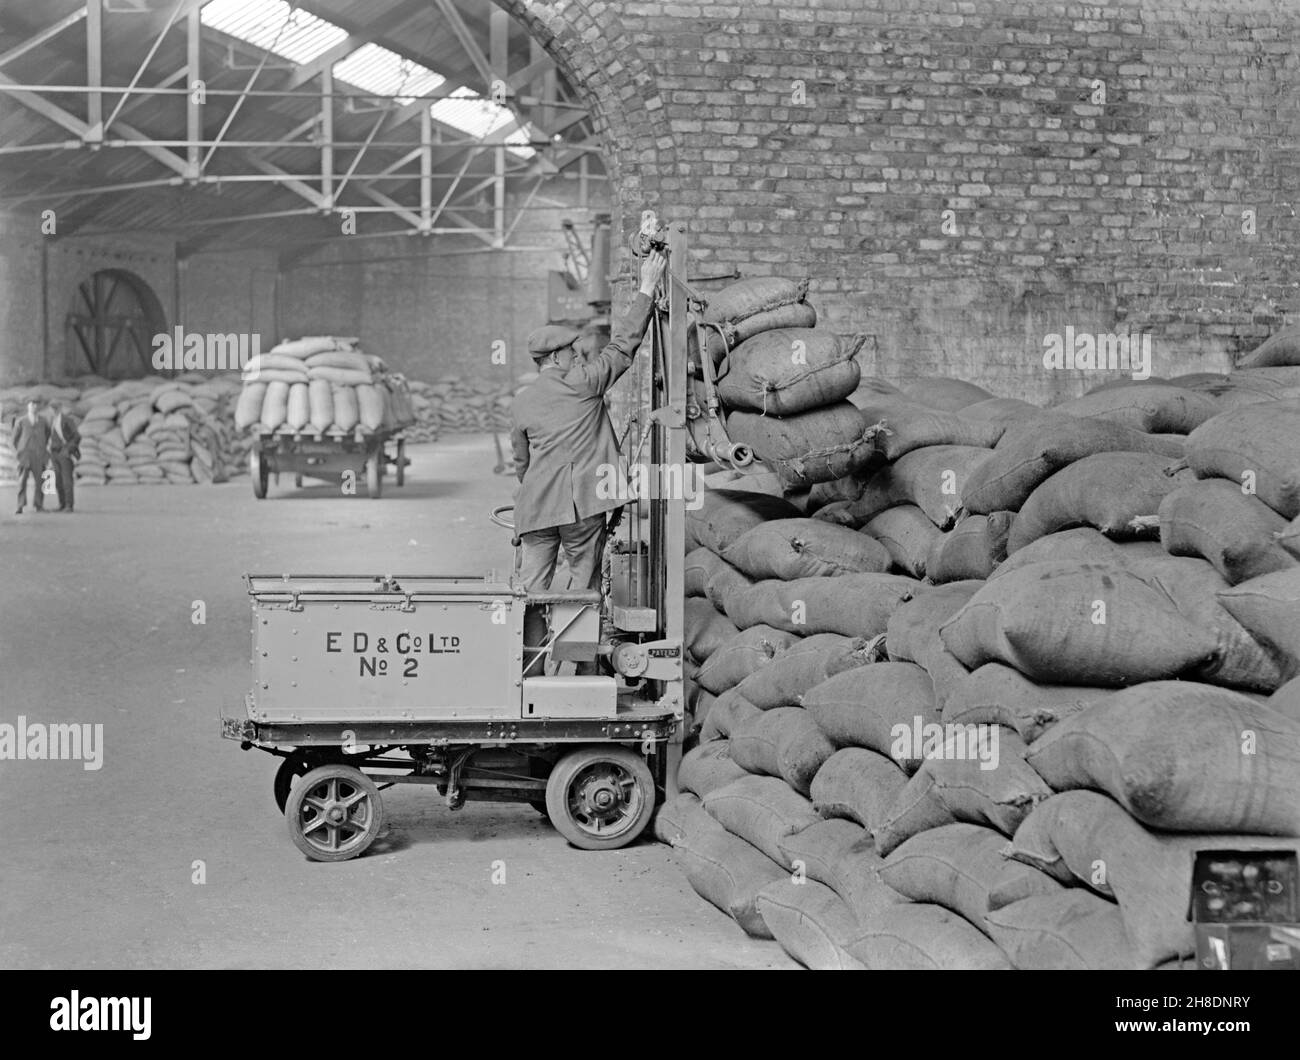 Early battery powered transport – here a forklift truck is being used to transport sacks at E D and Co Ltd, a shipping and warehousing company at Liverpool Docks, Lancashire, England, UK in the early years of the twentieth century. In the early years of motor transport electrically-powered vehicles were a good option compared with petrol driven ones for short-distance commercial transport, such as moving goods around factories. This is taken from an old original glass negative – a vintage 20th century photograph. Stock Photo